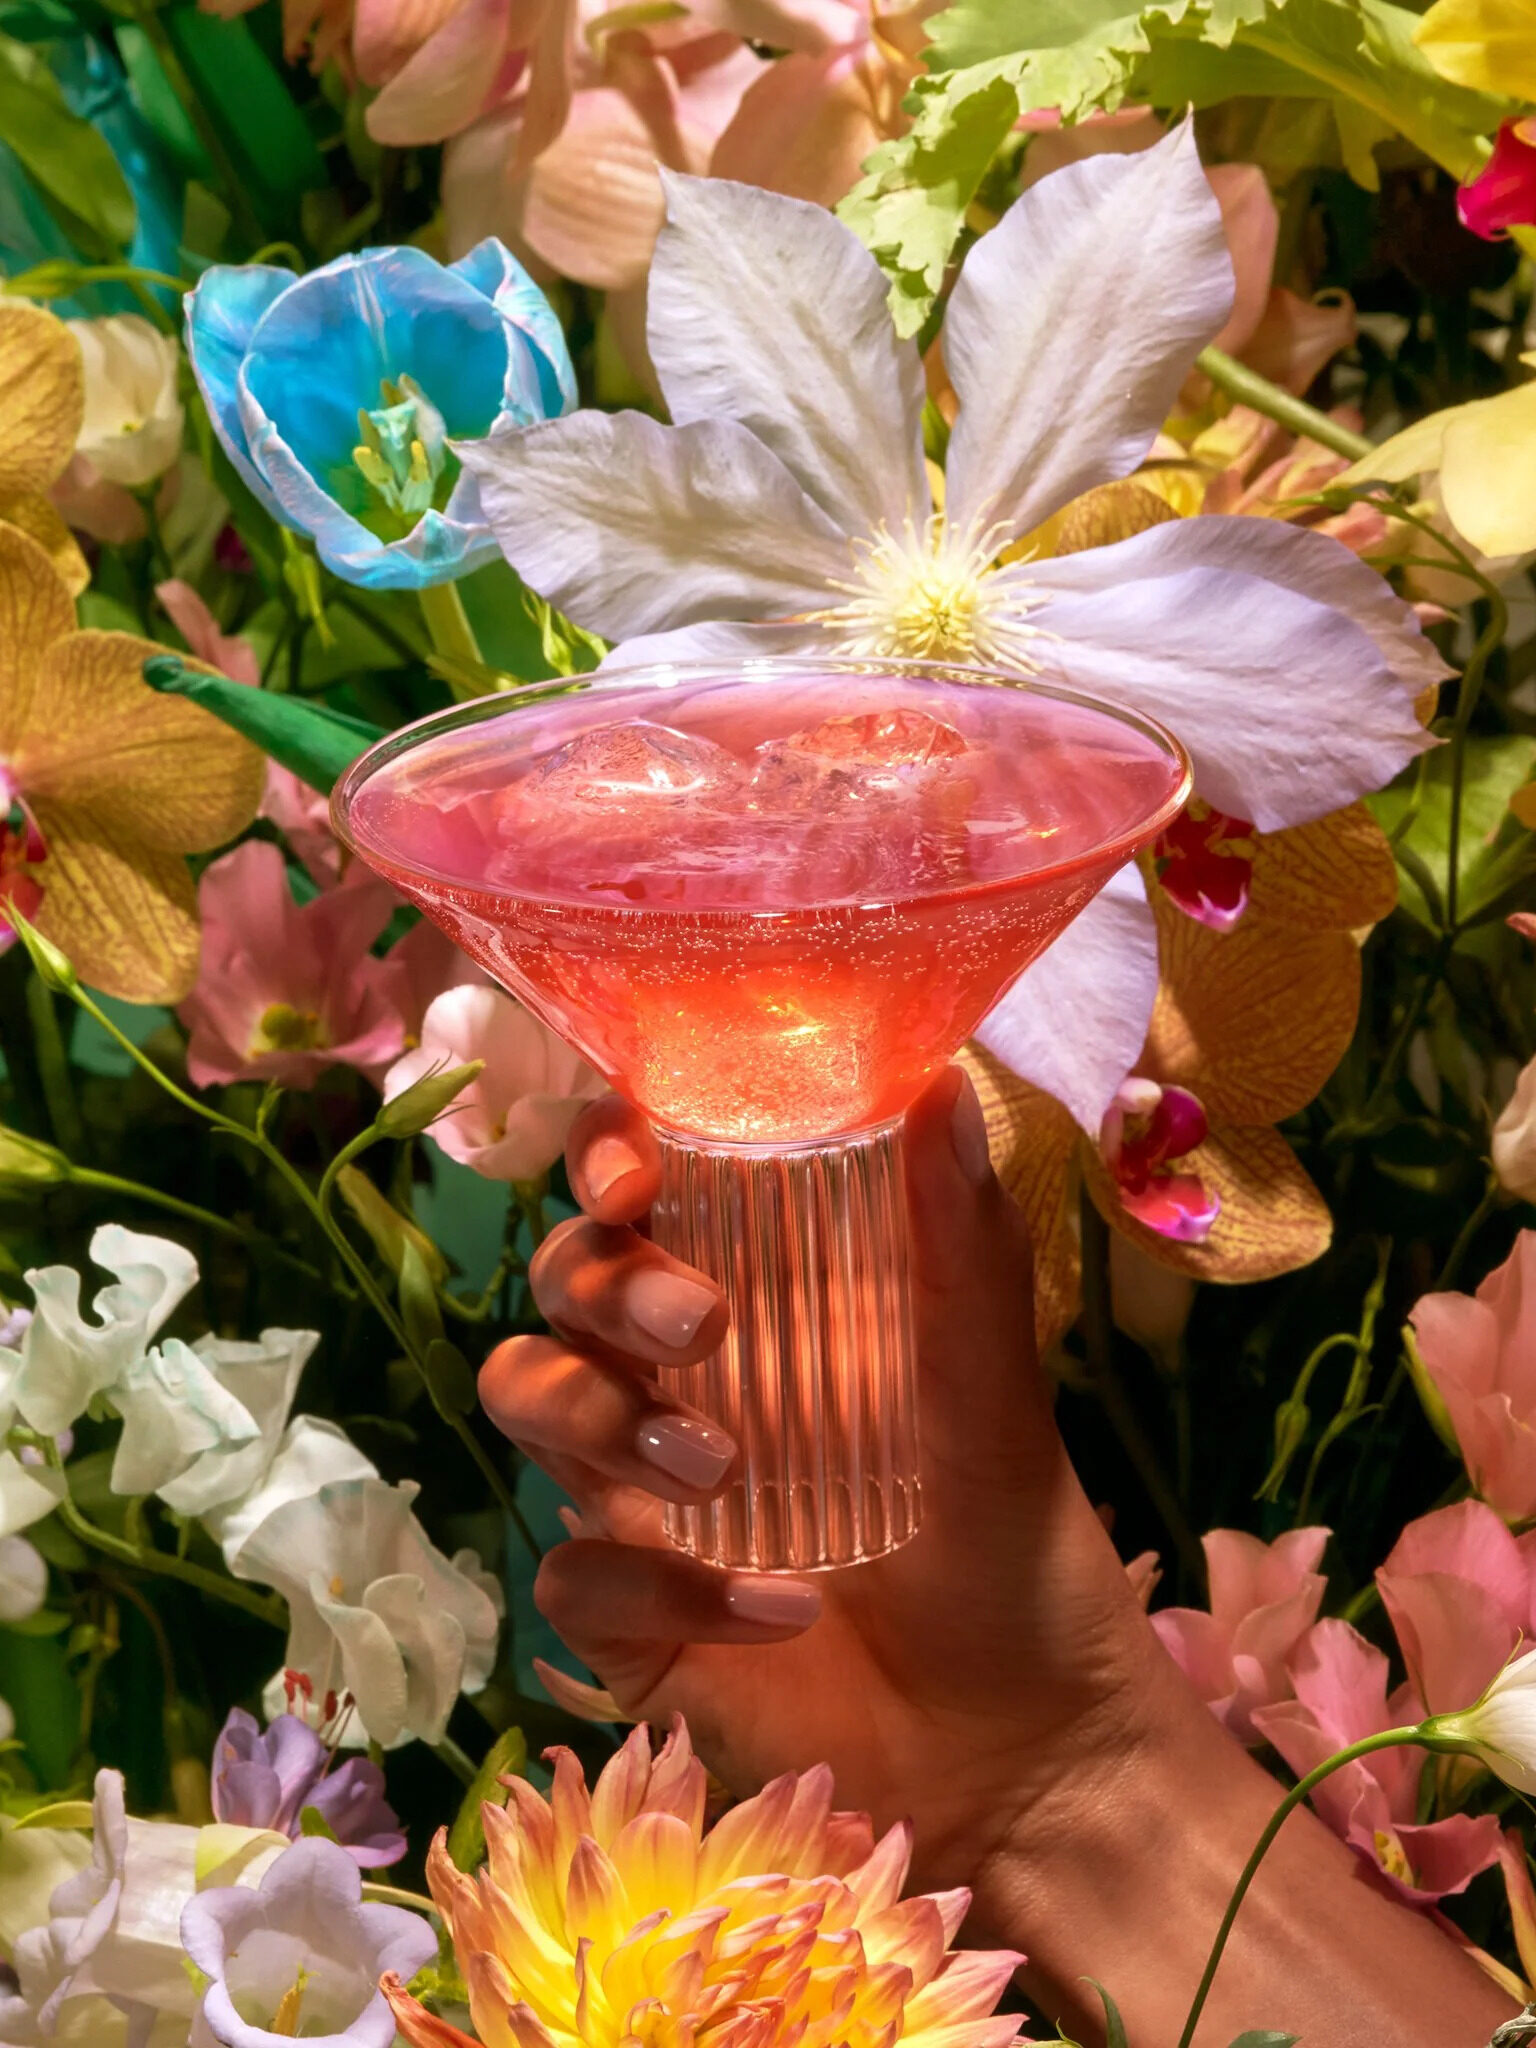 A hand holding up a cocktail glass filled with Kin Euphorics, with flowers in the background.